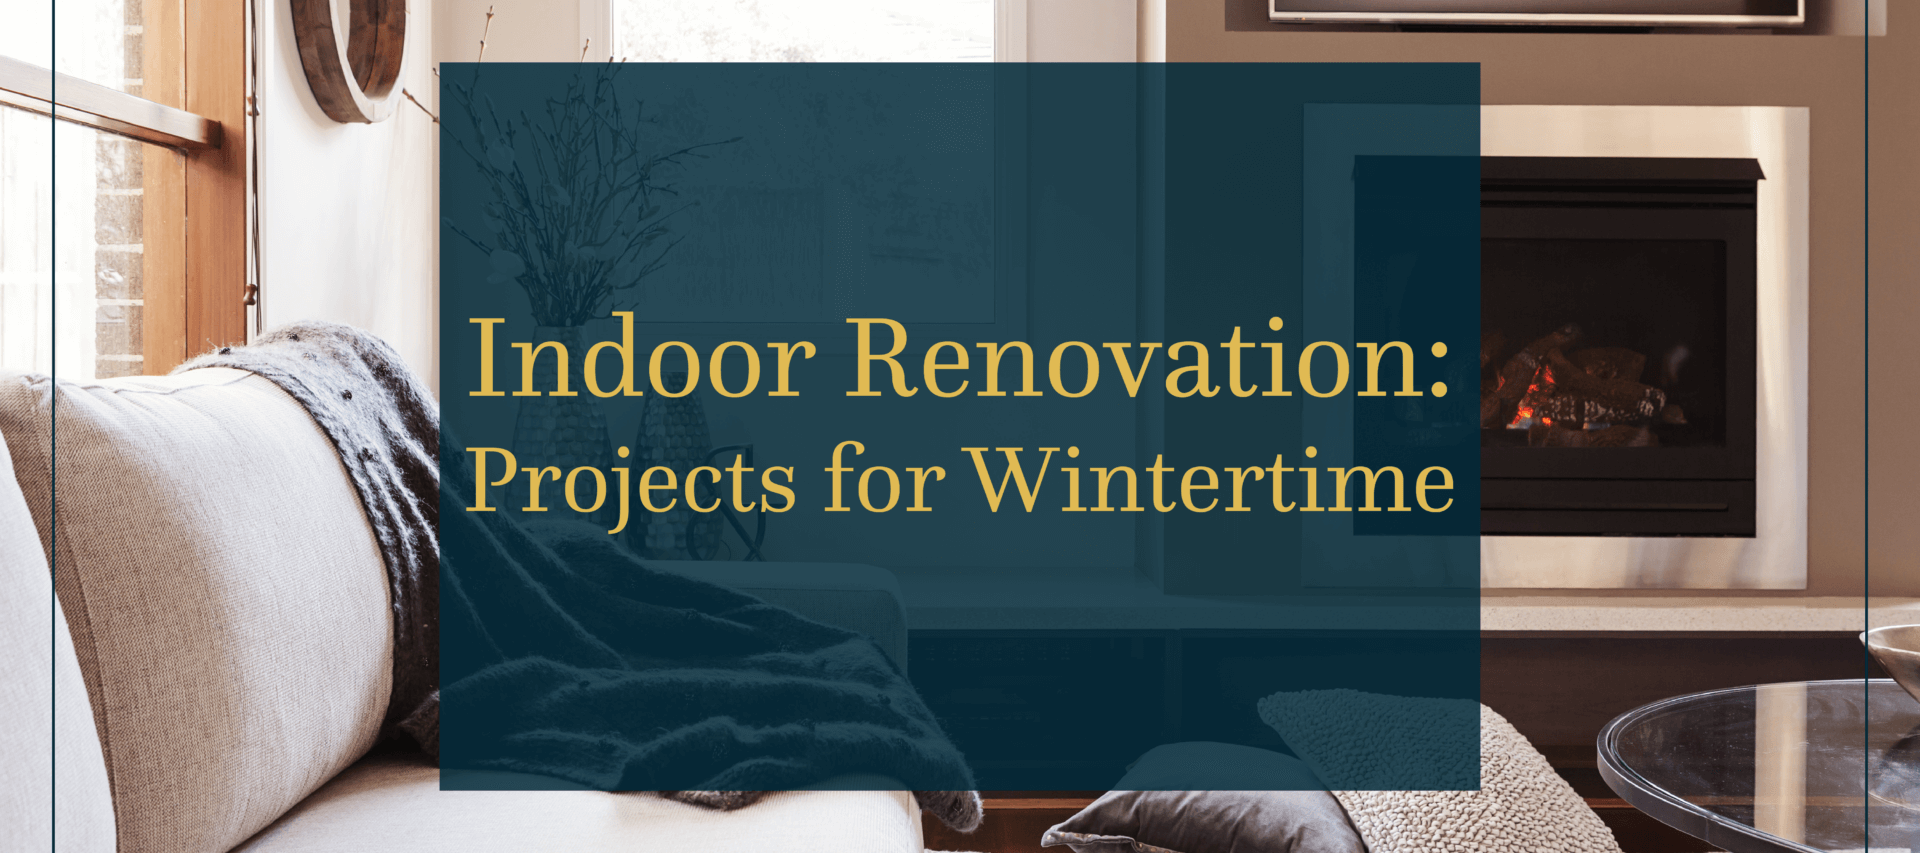 Indoor Renovation: Projects for Wintertime